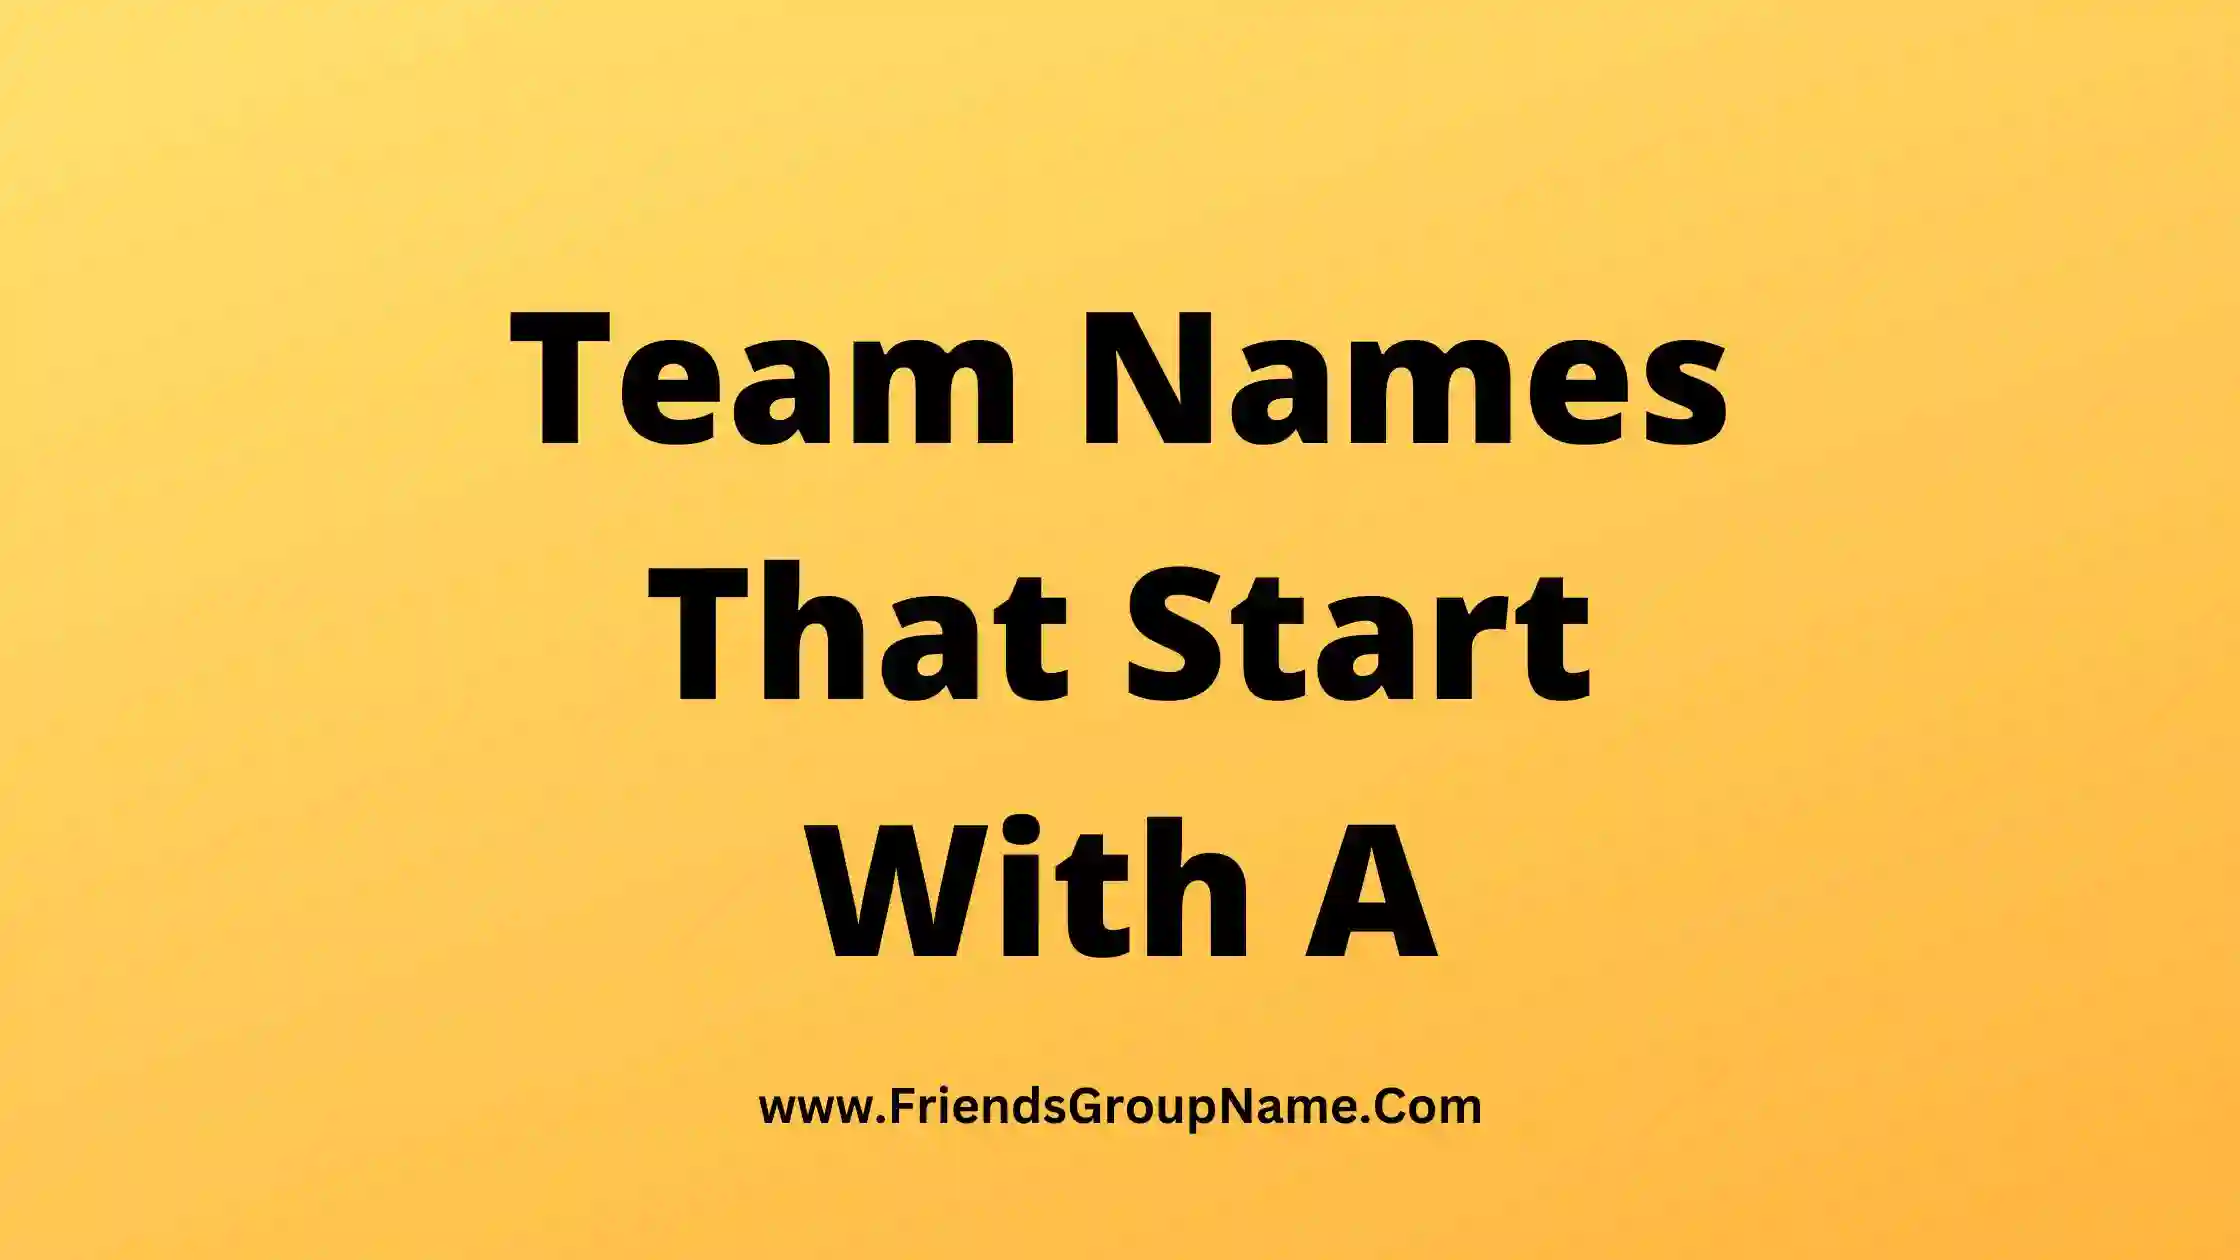 Team Names That Start With A